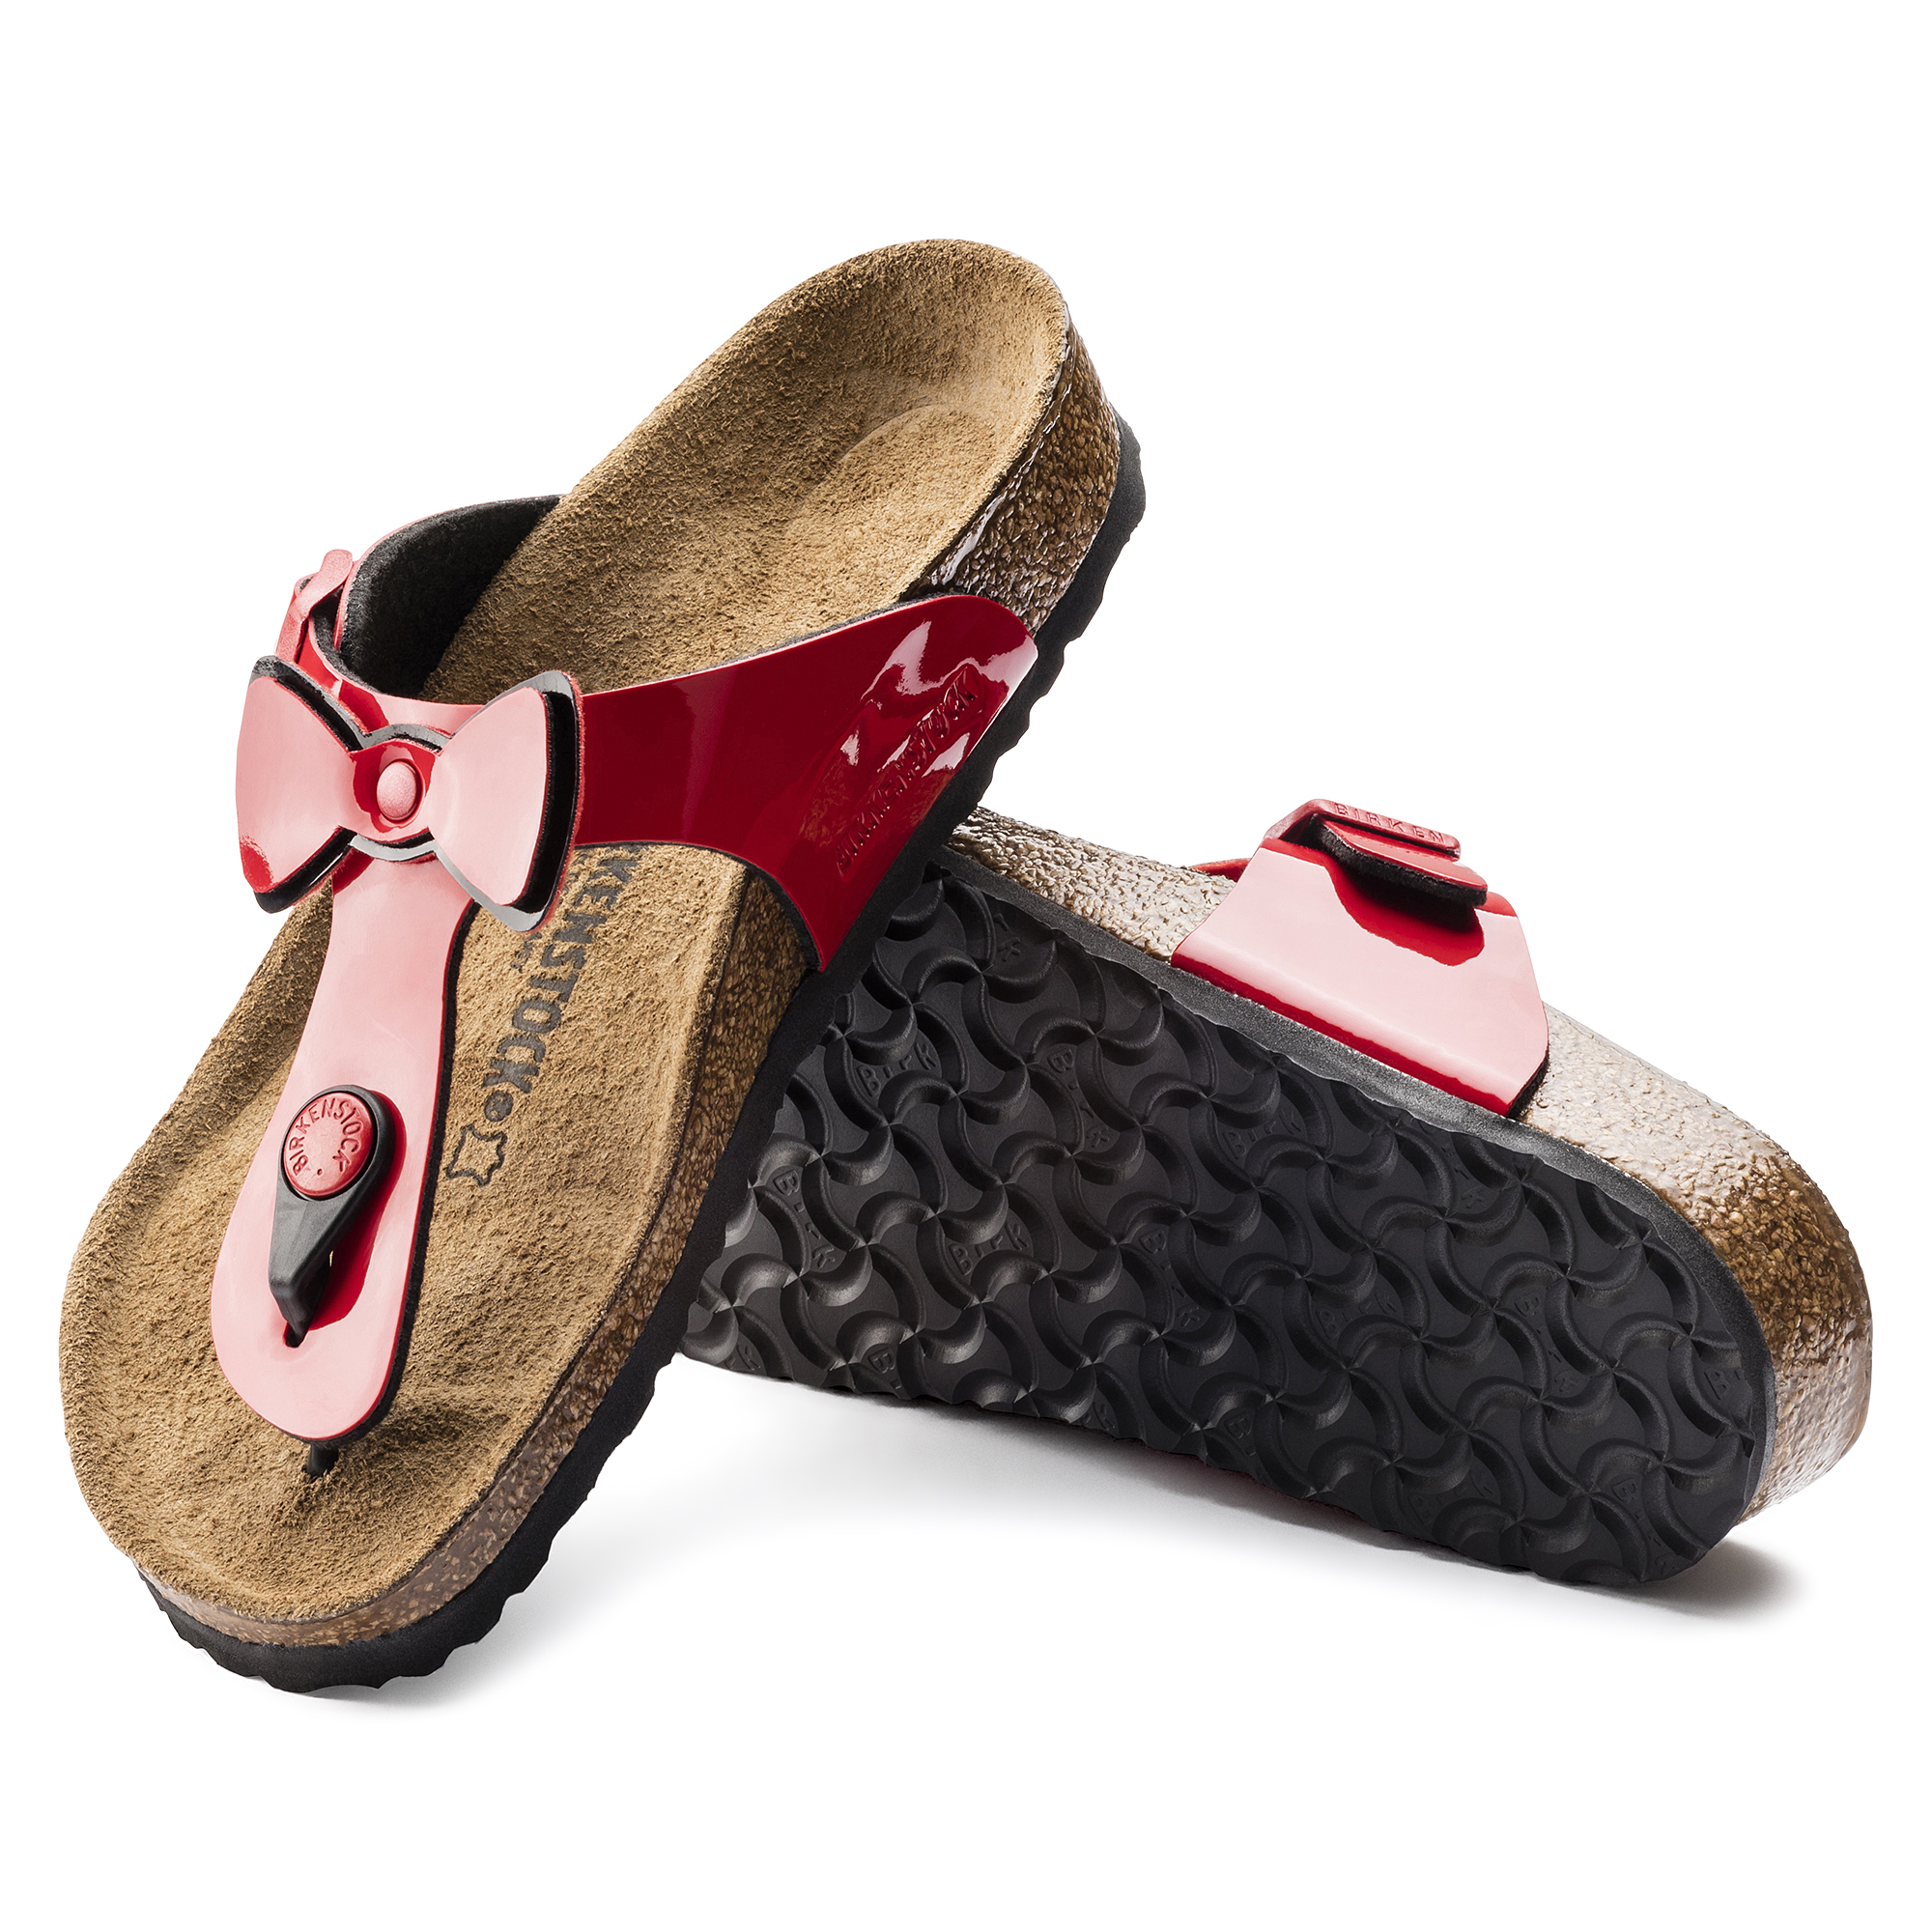 Gizeh Birko-Flor Patent Two Tone Red 